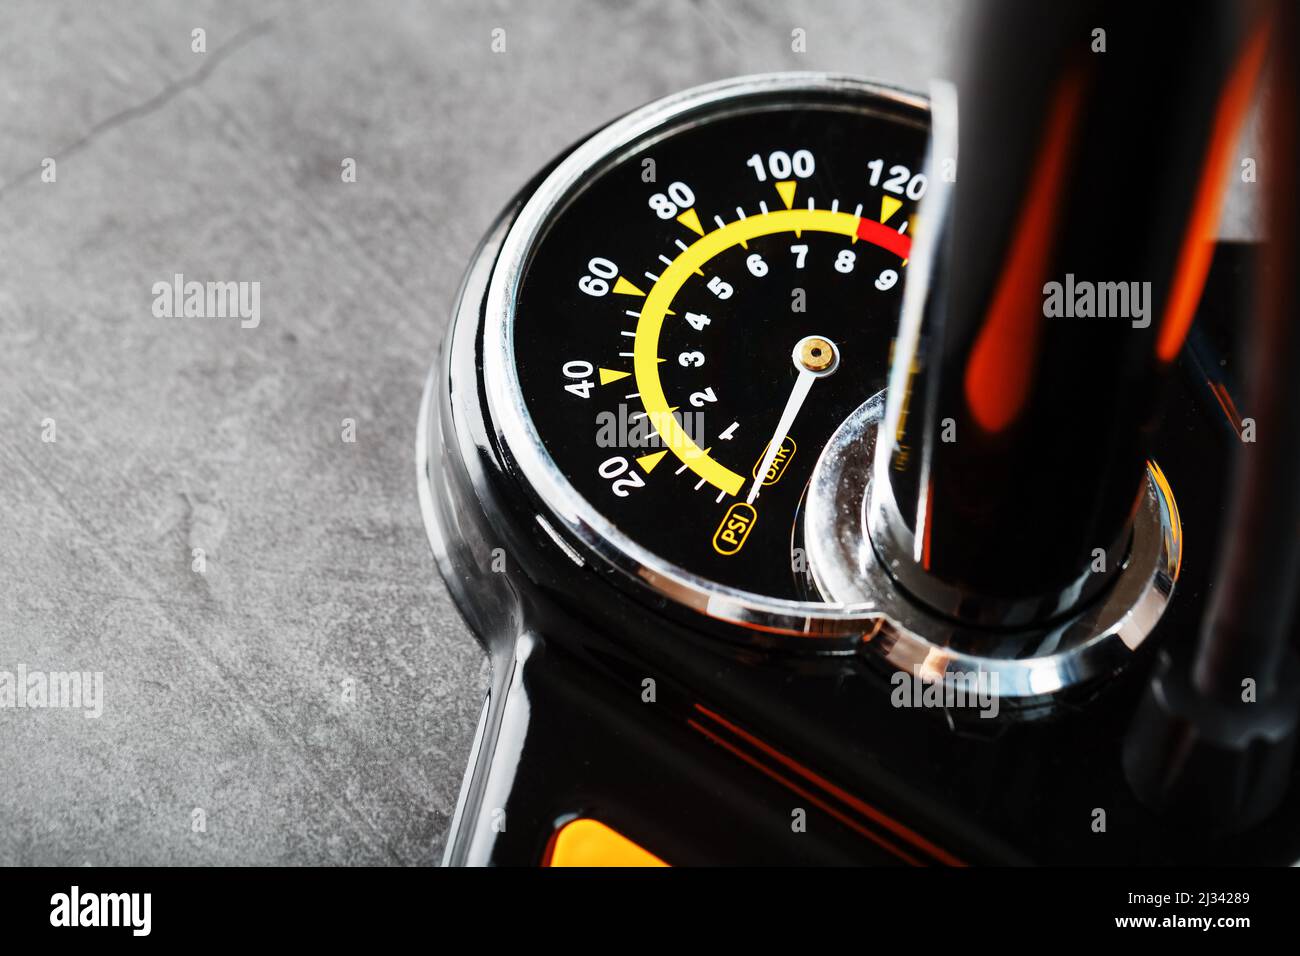 Air pump manometer for monitoring tire pressure on a dark background with free space Stock Photo